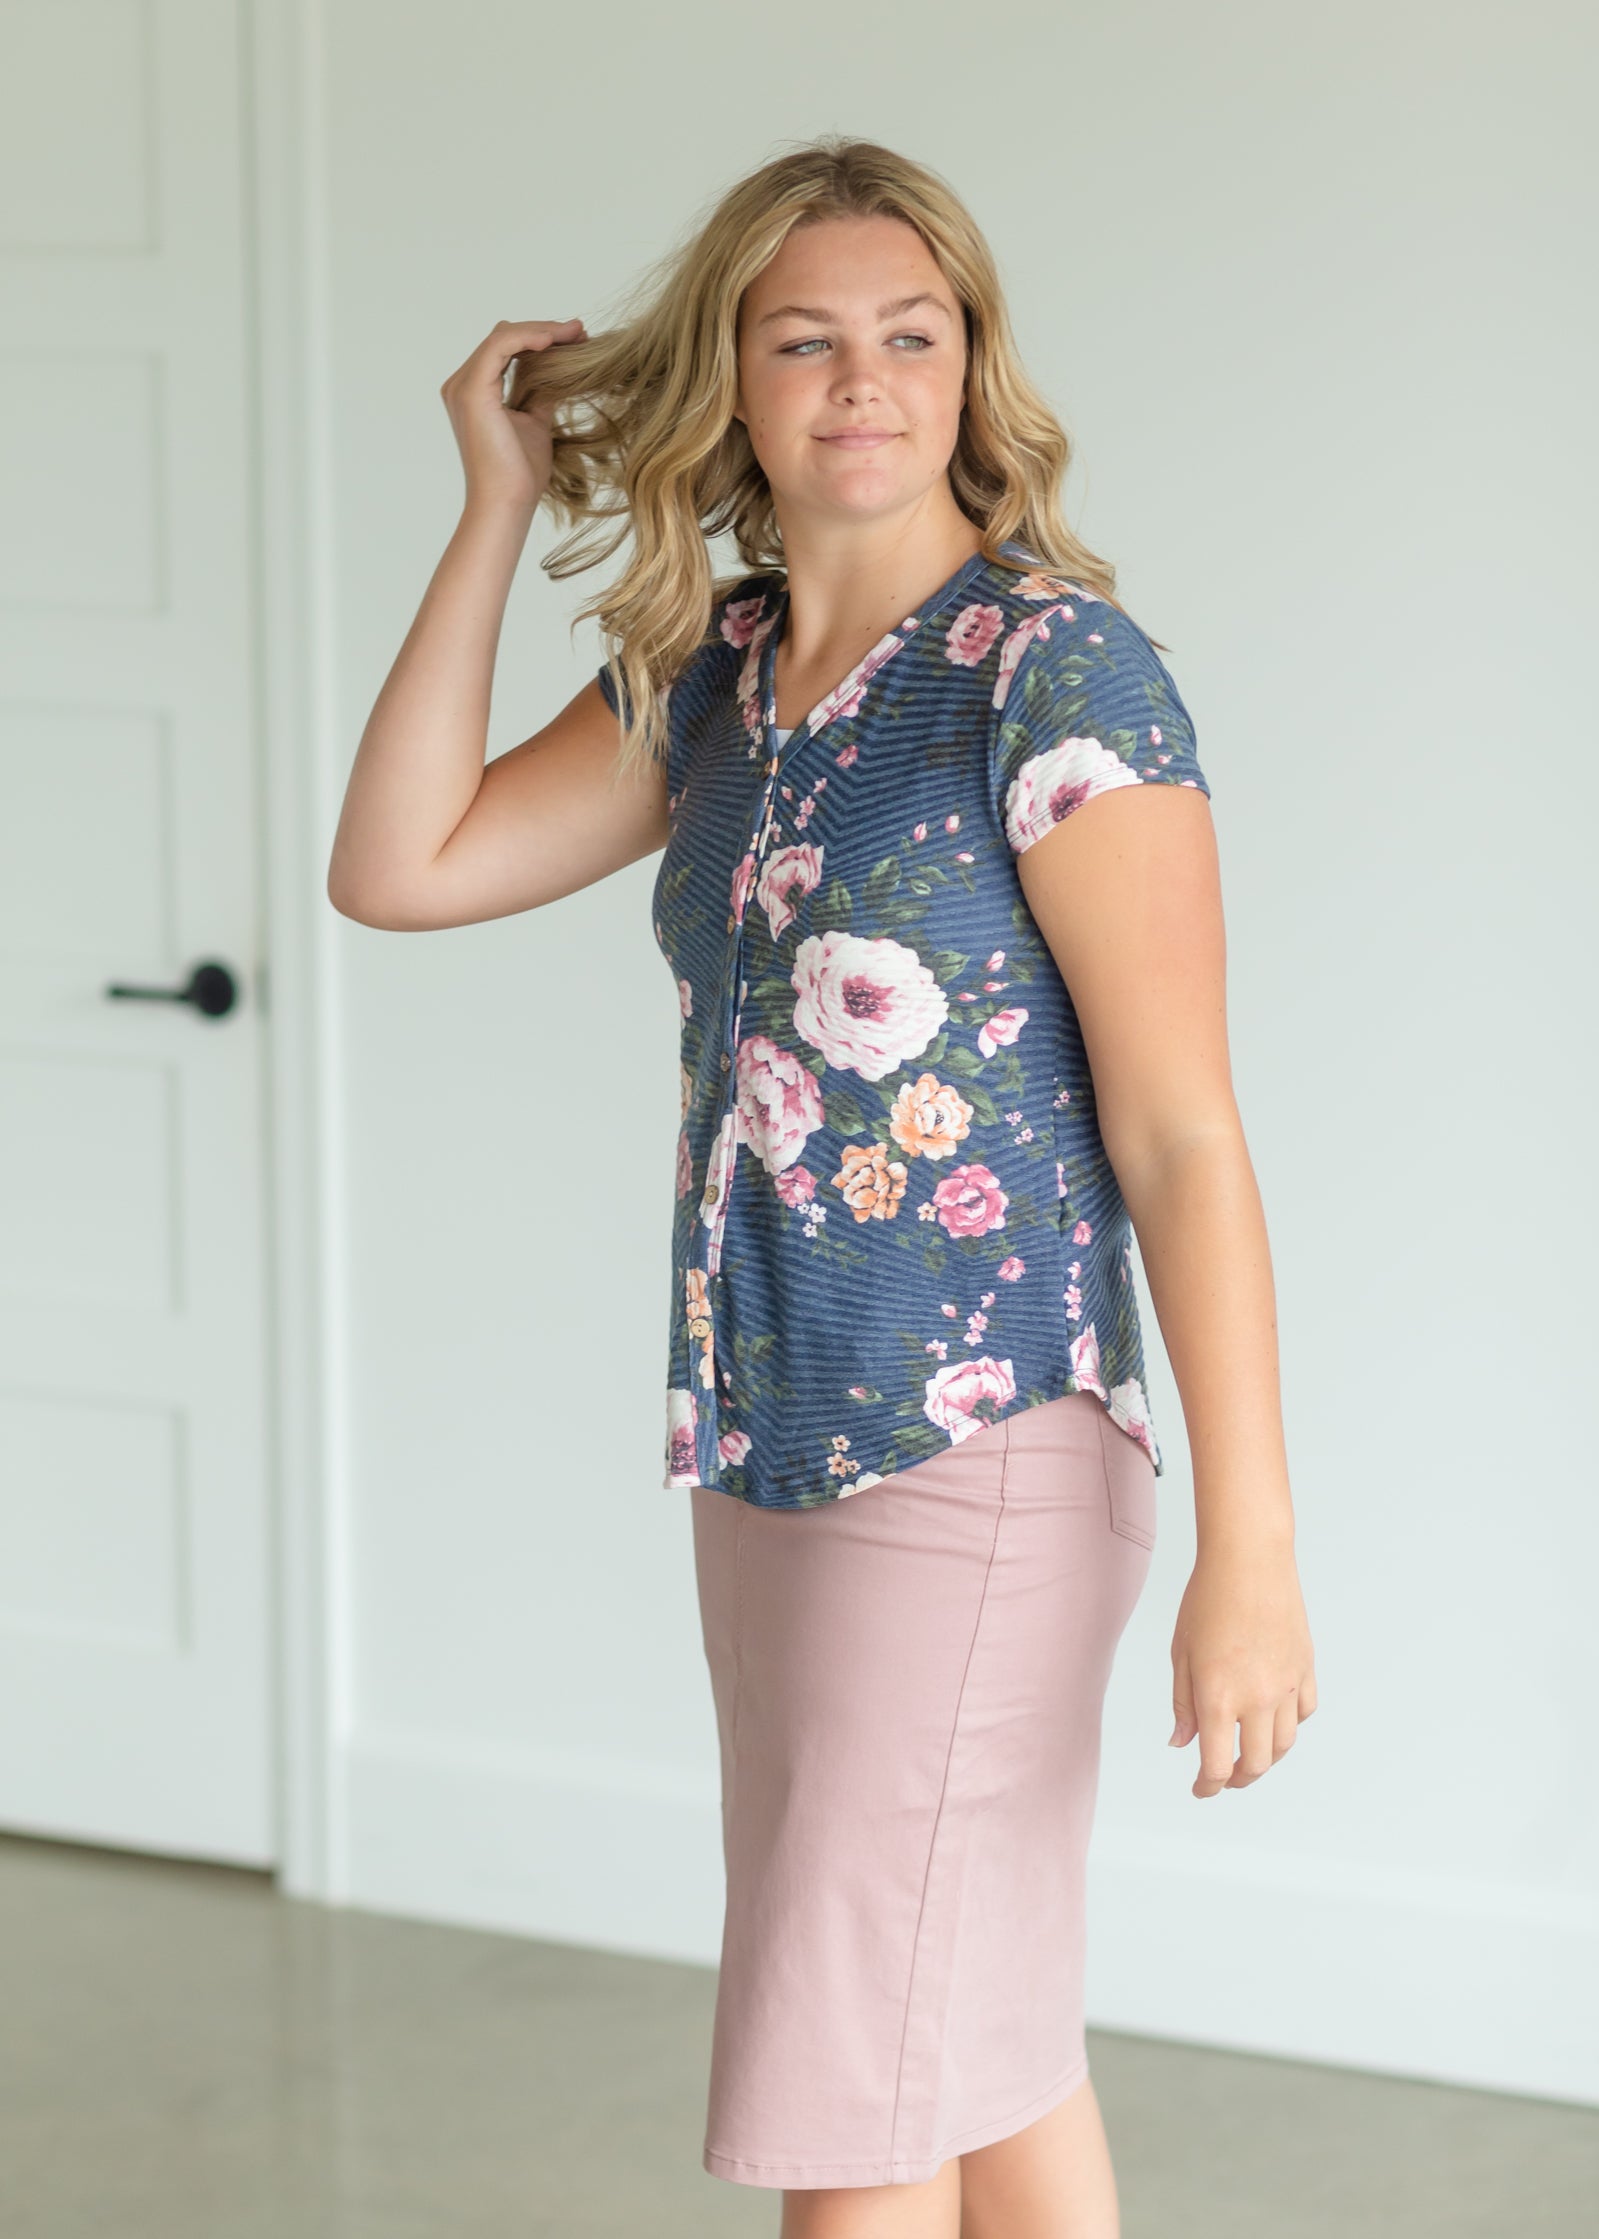 Navy Floral Print Faux Button Top Tops